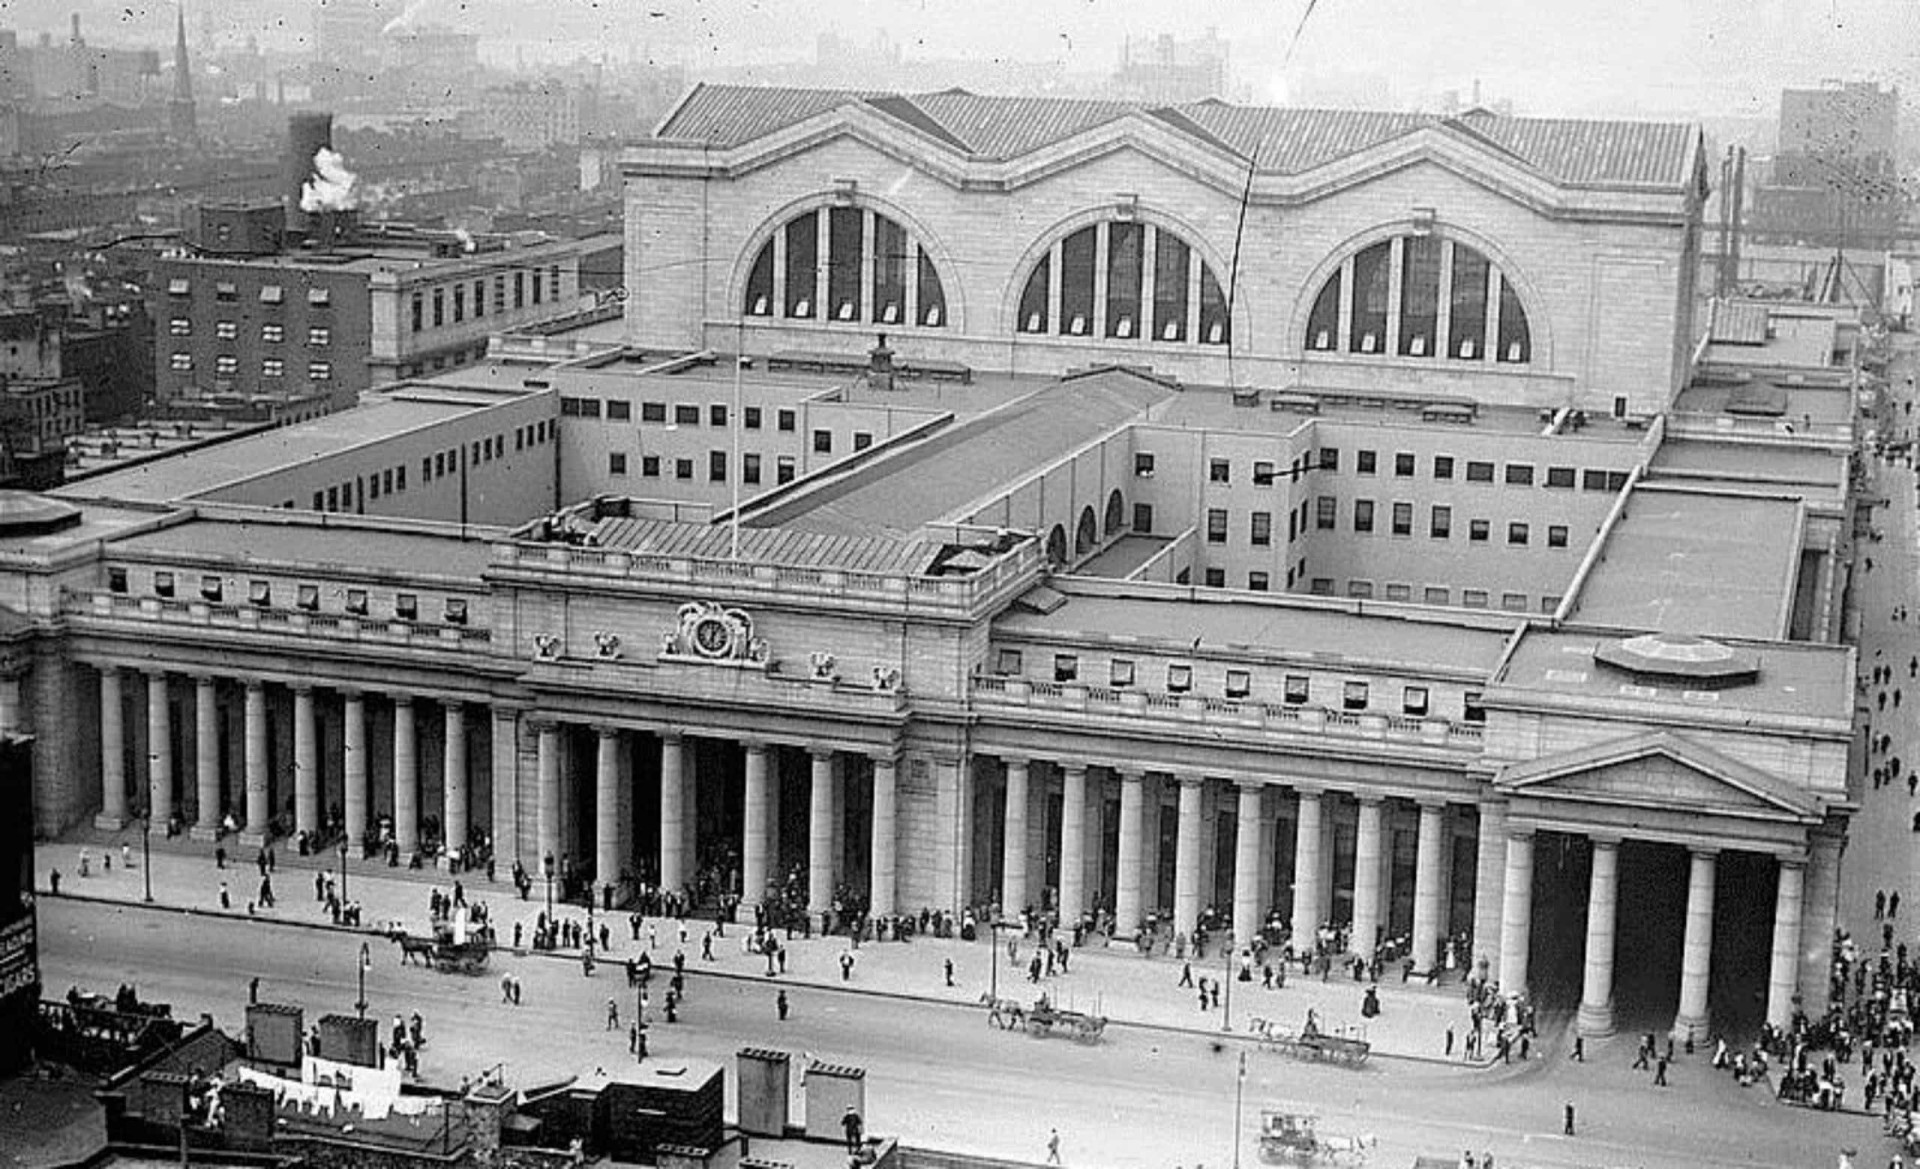 <p>The original Pennsylvania Station was an early New York City visitor attraction. During its golden era in the mid-1940s, over 100 million passengers passed through this lavish Beaux Arts-style transport hub. Its controversial demolition in 1963 galvanized the modern historical preservation movement in the United States.</p><p>You may also like:<a href="https://www.starsinsider.com/n/497045?utm_source=msn.com&utm_medium=display&utm_campaign=referral_description&utm_content=668561en-my"> Iconic North American wildlife </a></p>